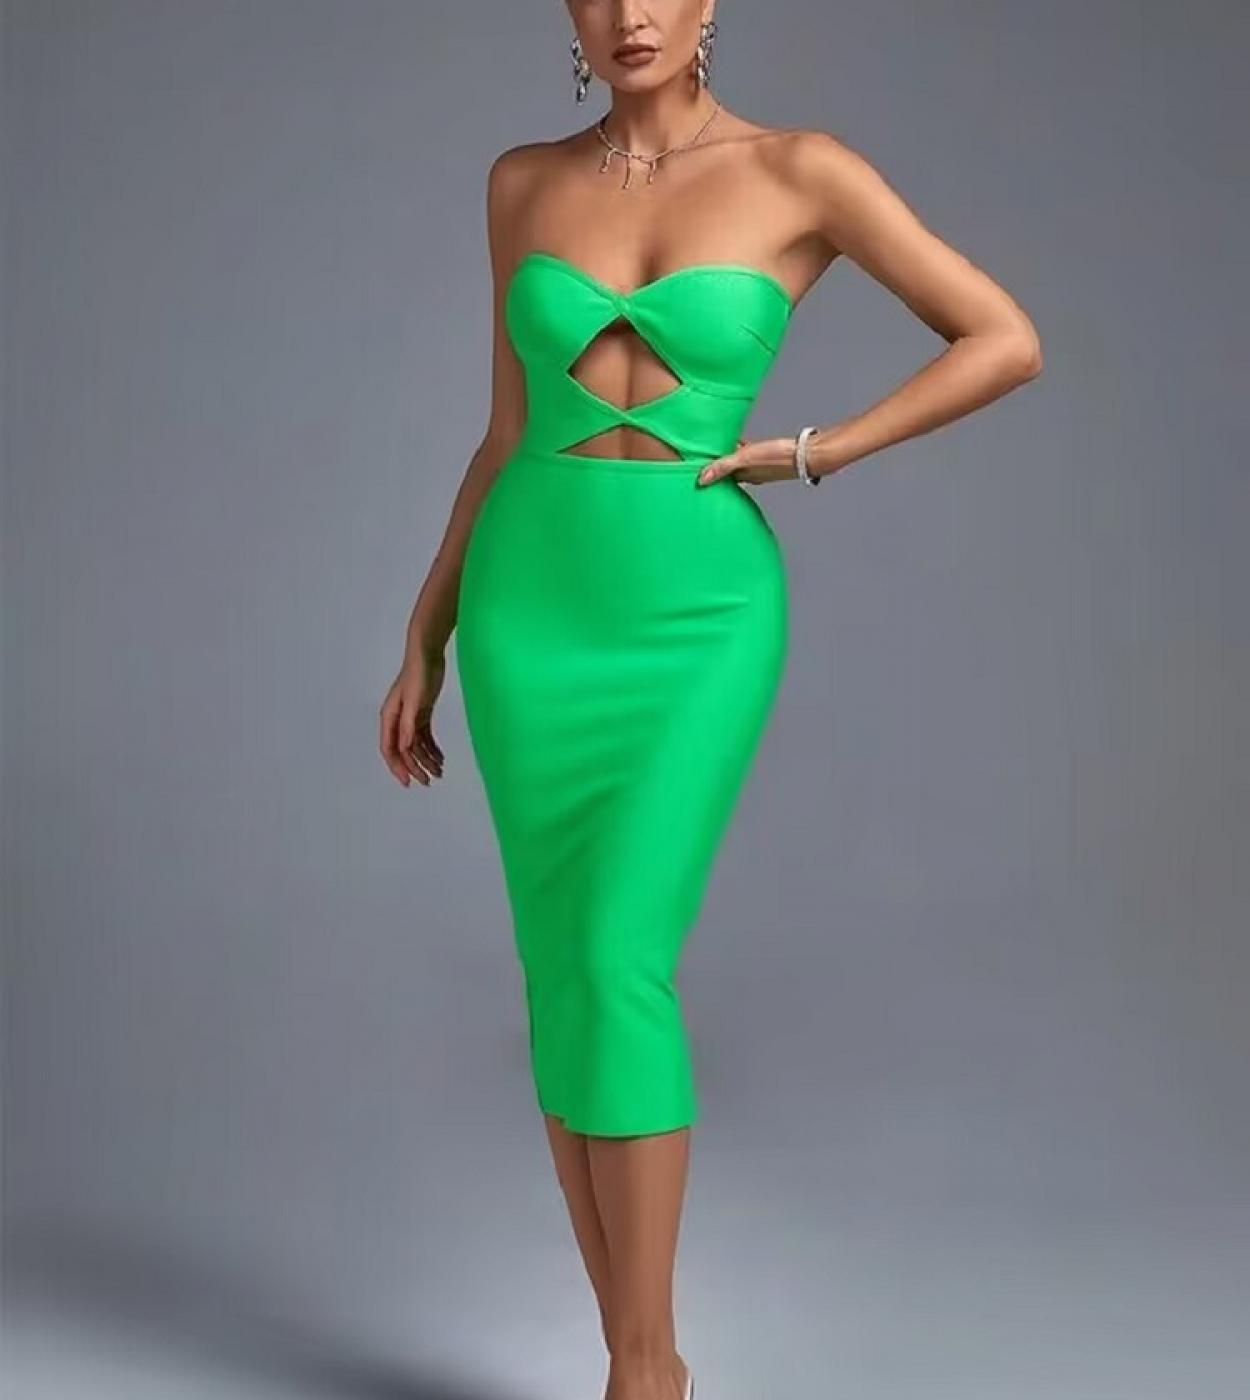 2023 Fashion  Hollow Out Midi Bandage Dress For Women Evening Party Elegant Birthday Club Chest Wrapping Bodycon Dresses